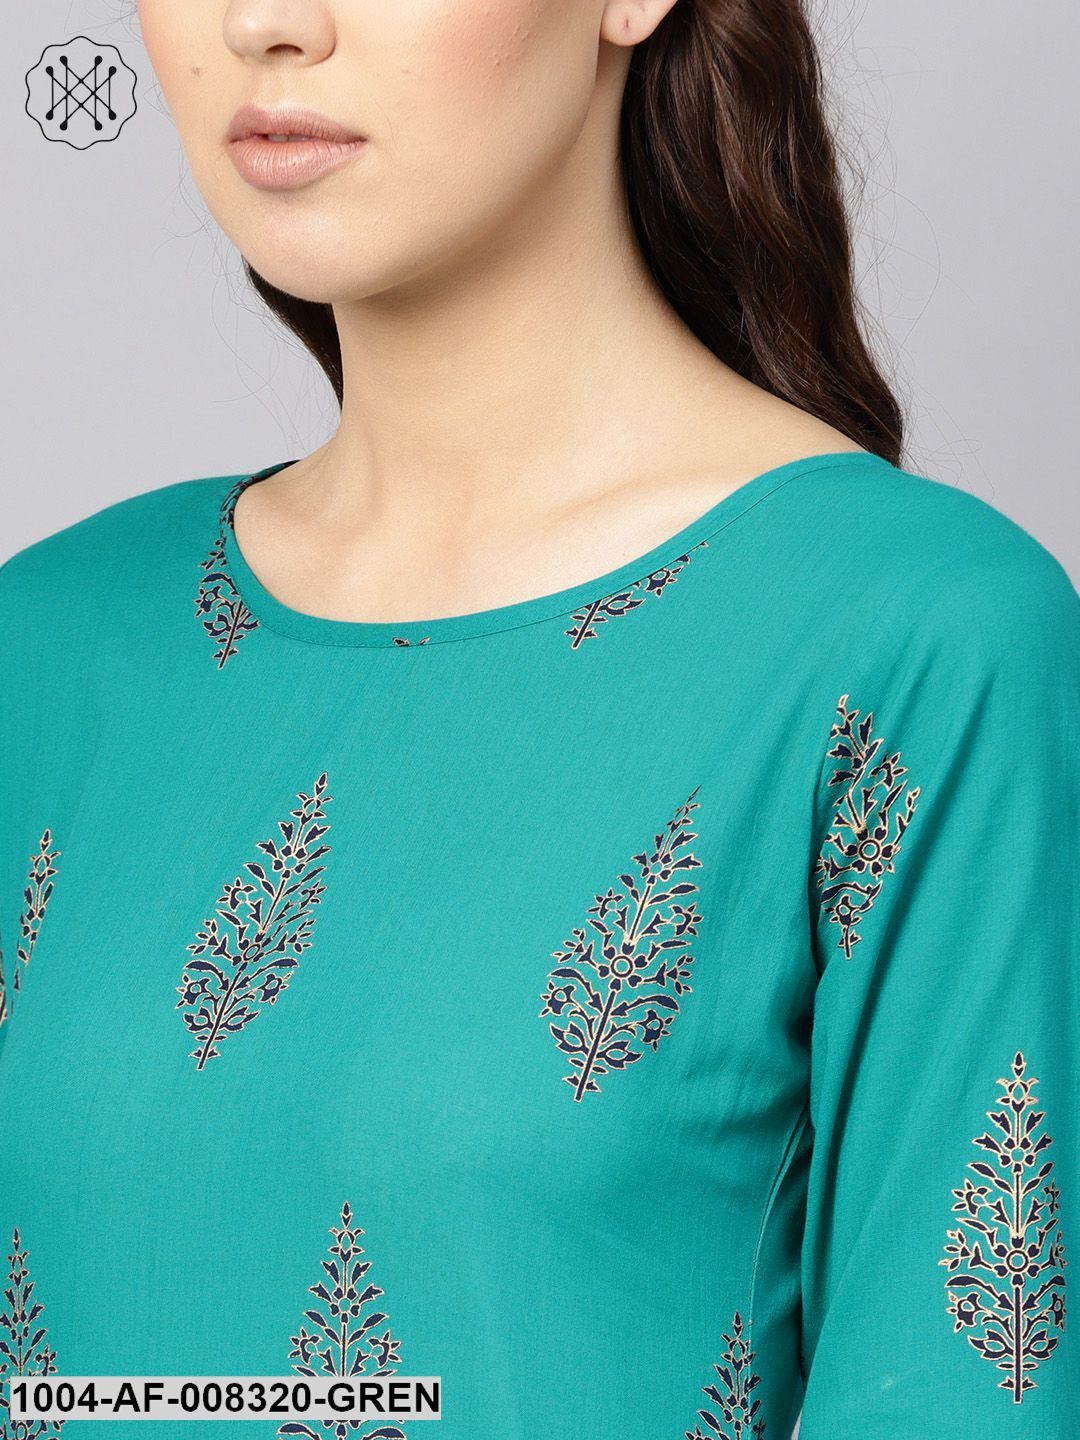 Green Gold Printed Round Neck 3/4Th Sleeves Straight Kurta With Black Printed Skirt.